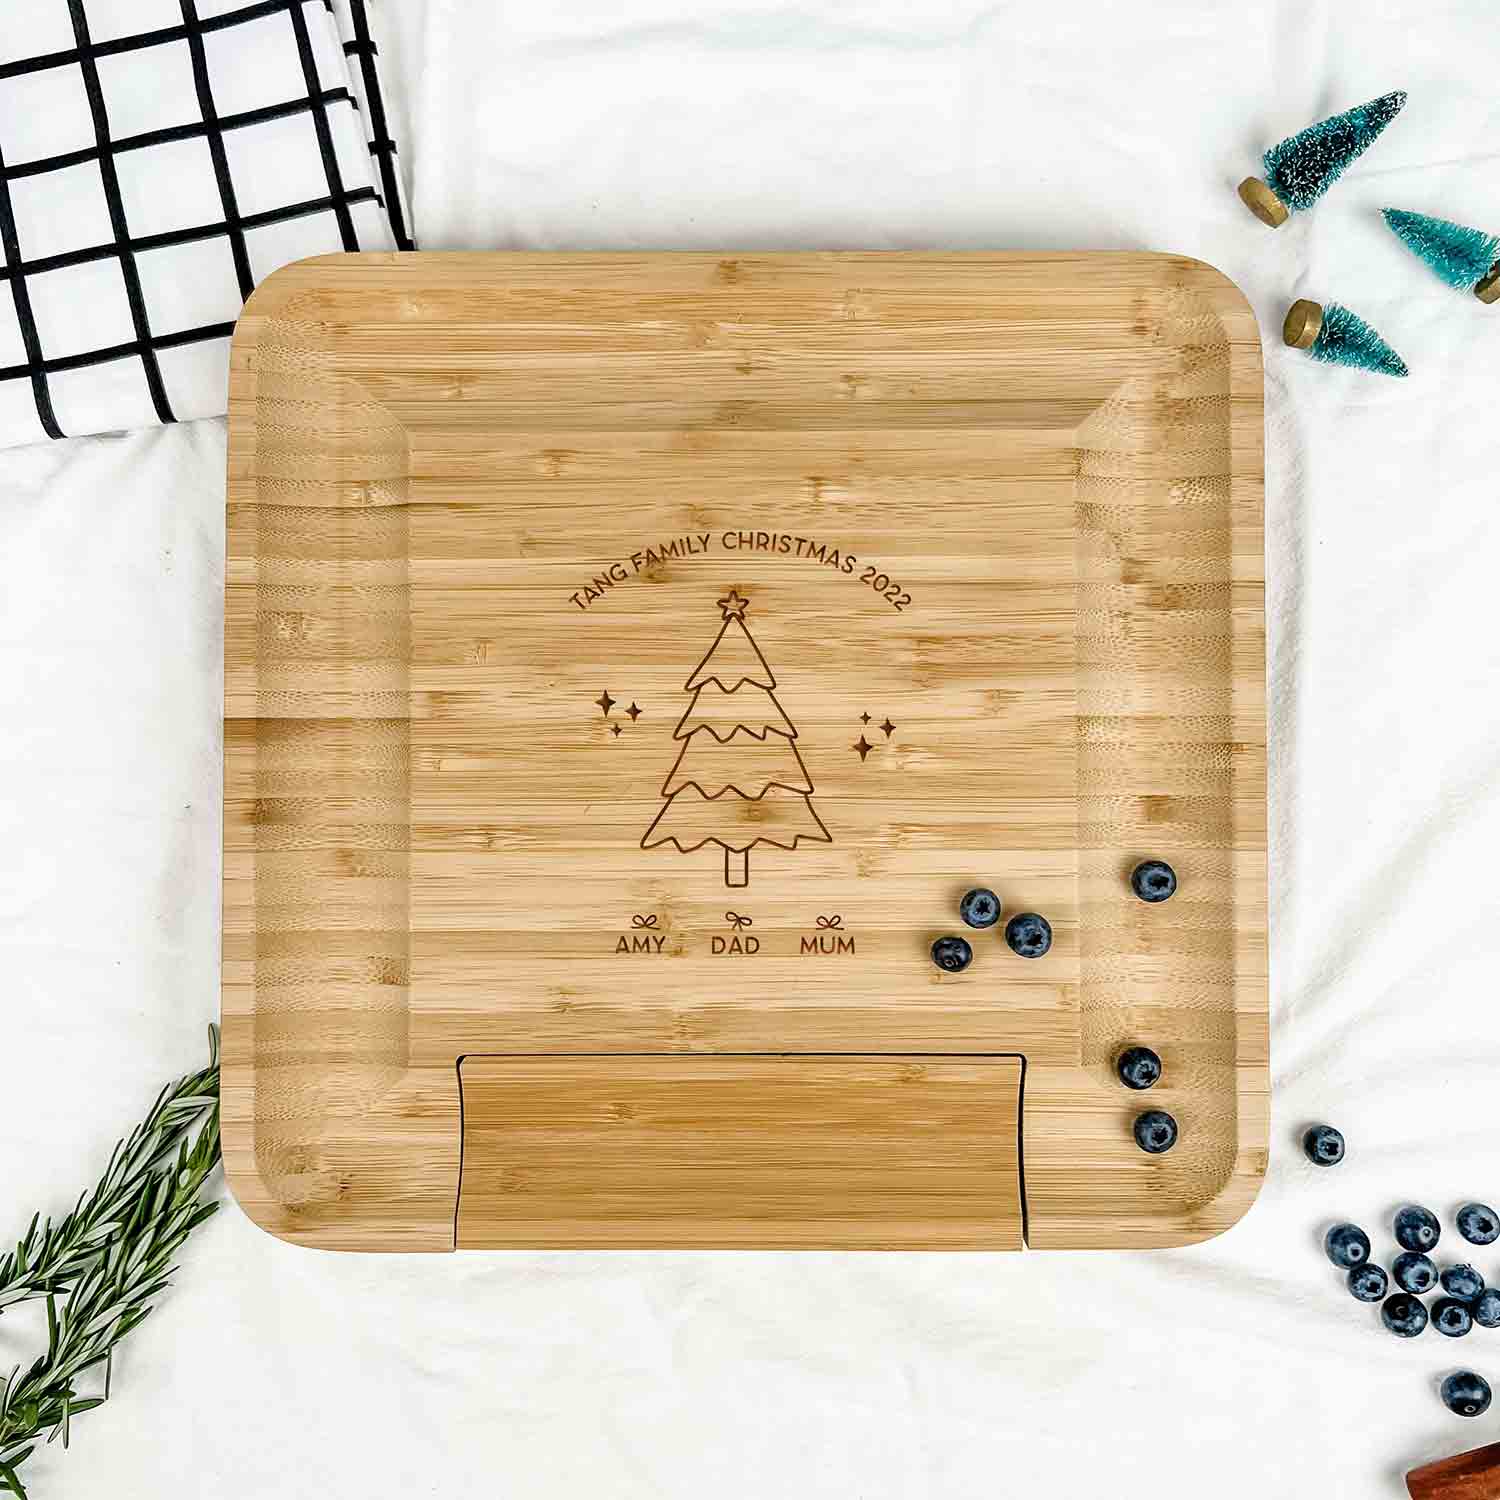 Engraved Wooden Square Cheese Board - Christmas Tree Gifts Family Design